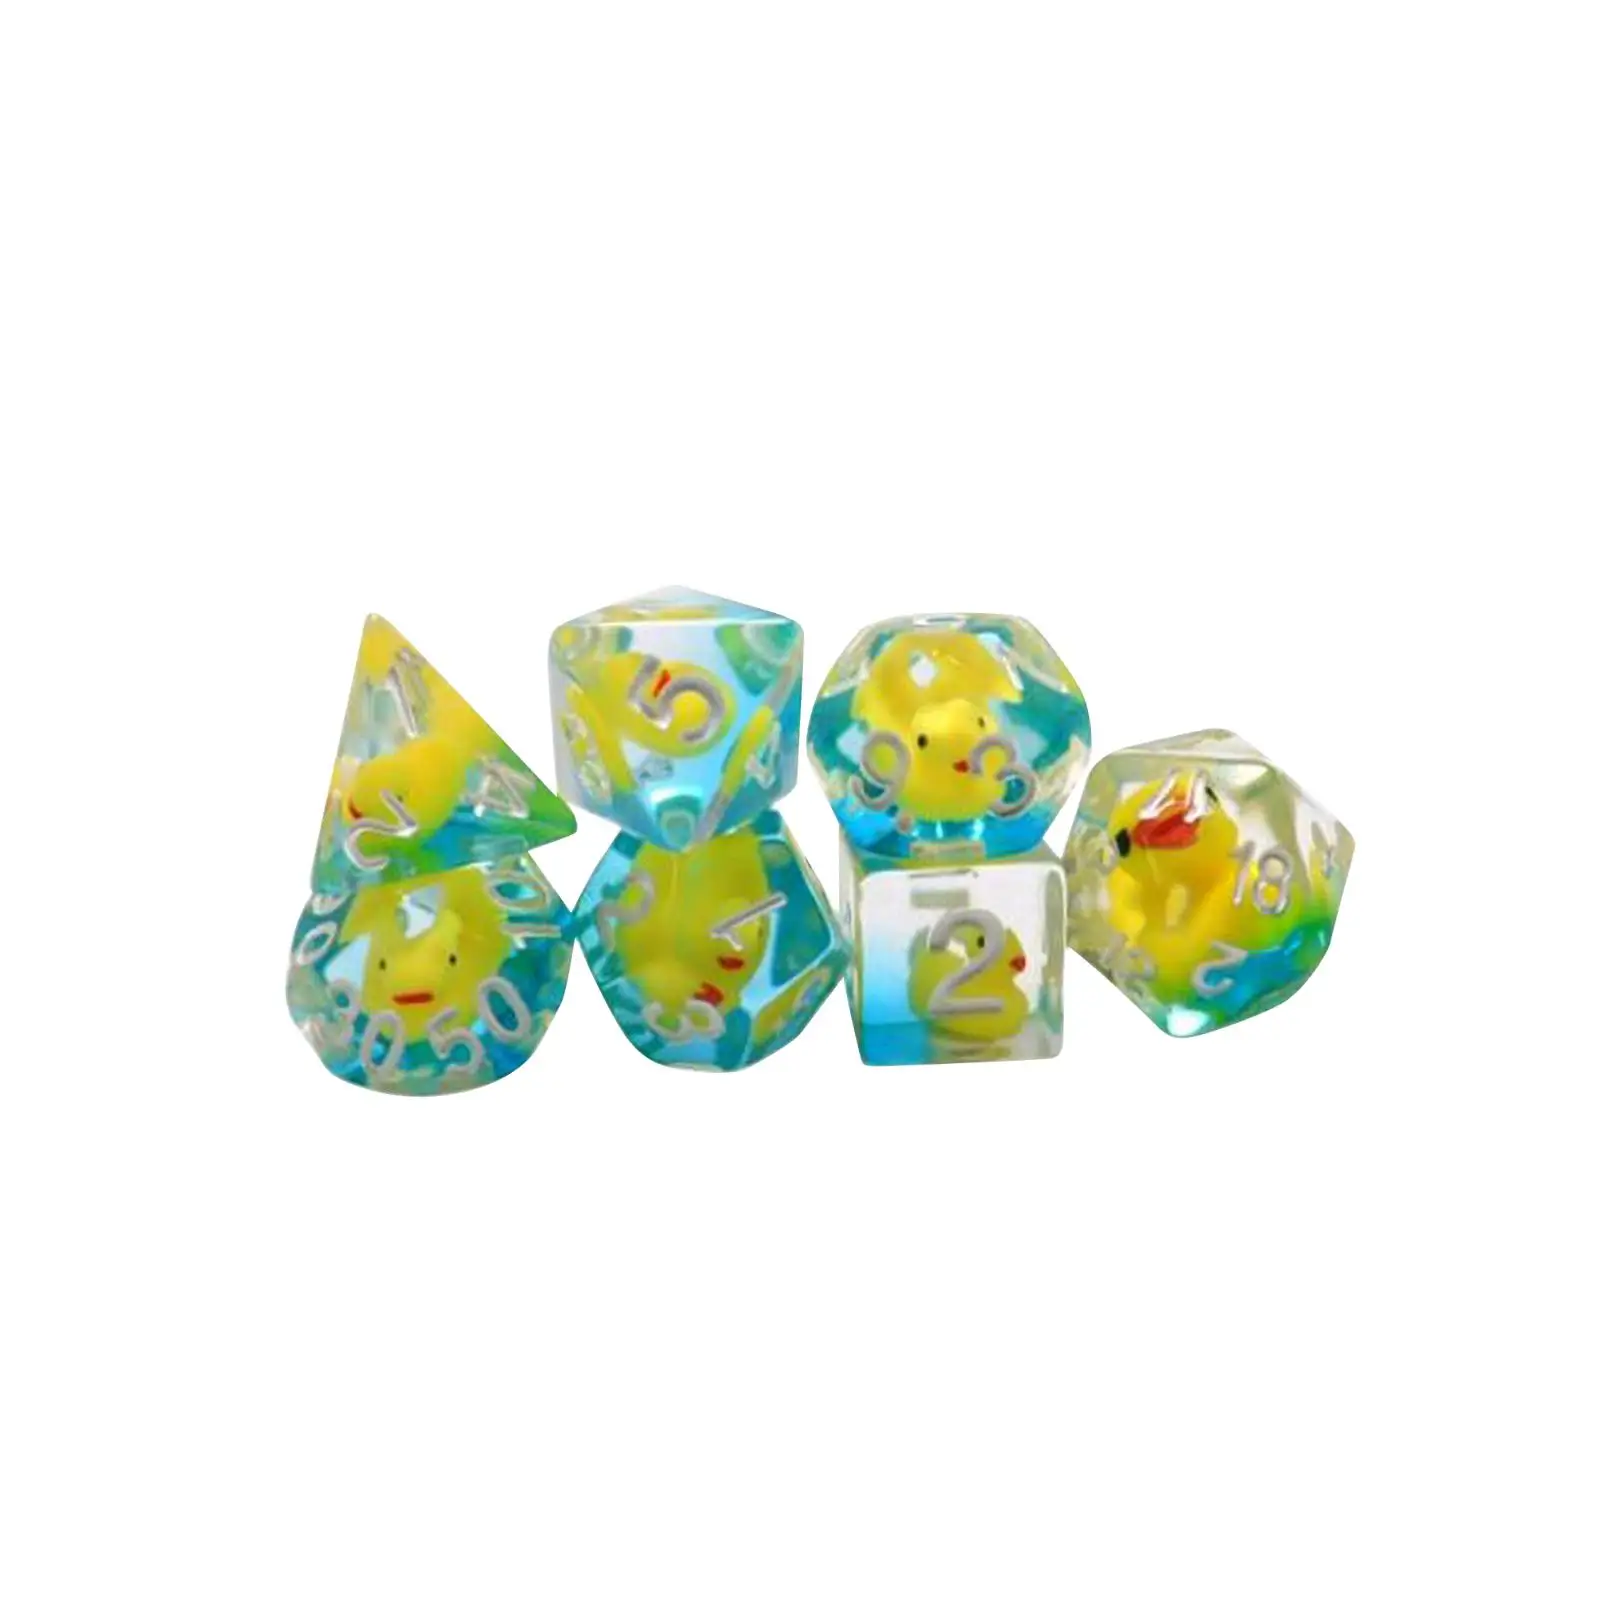 7x Polyhedral Dices Party Supplies Filled with Ducks Animal D4-d20 Game Dices Resin Dices for Bar Party KTV Card Game Card Games